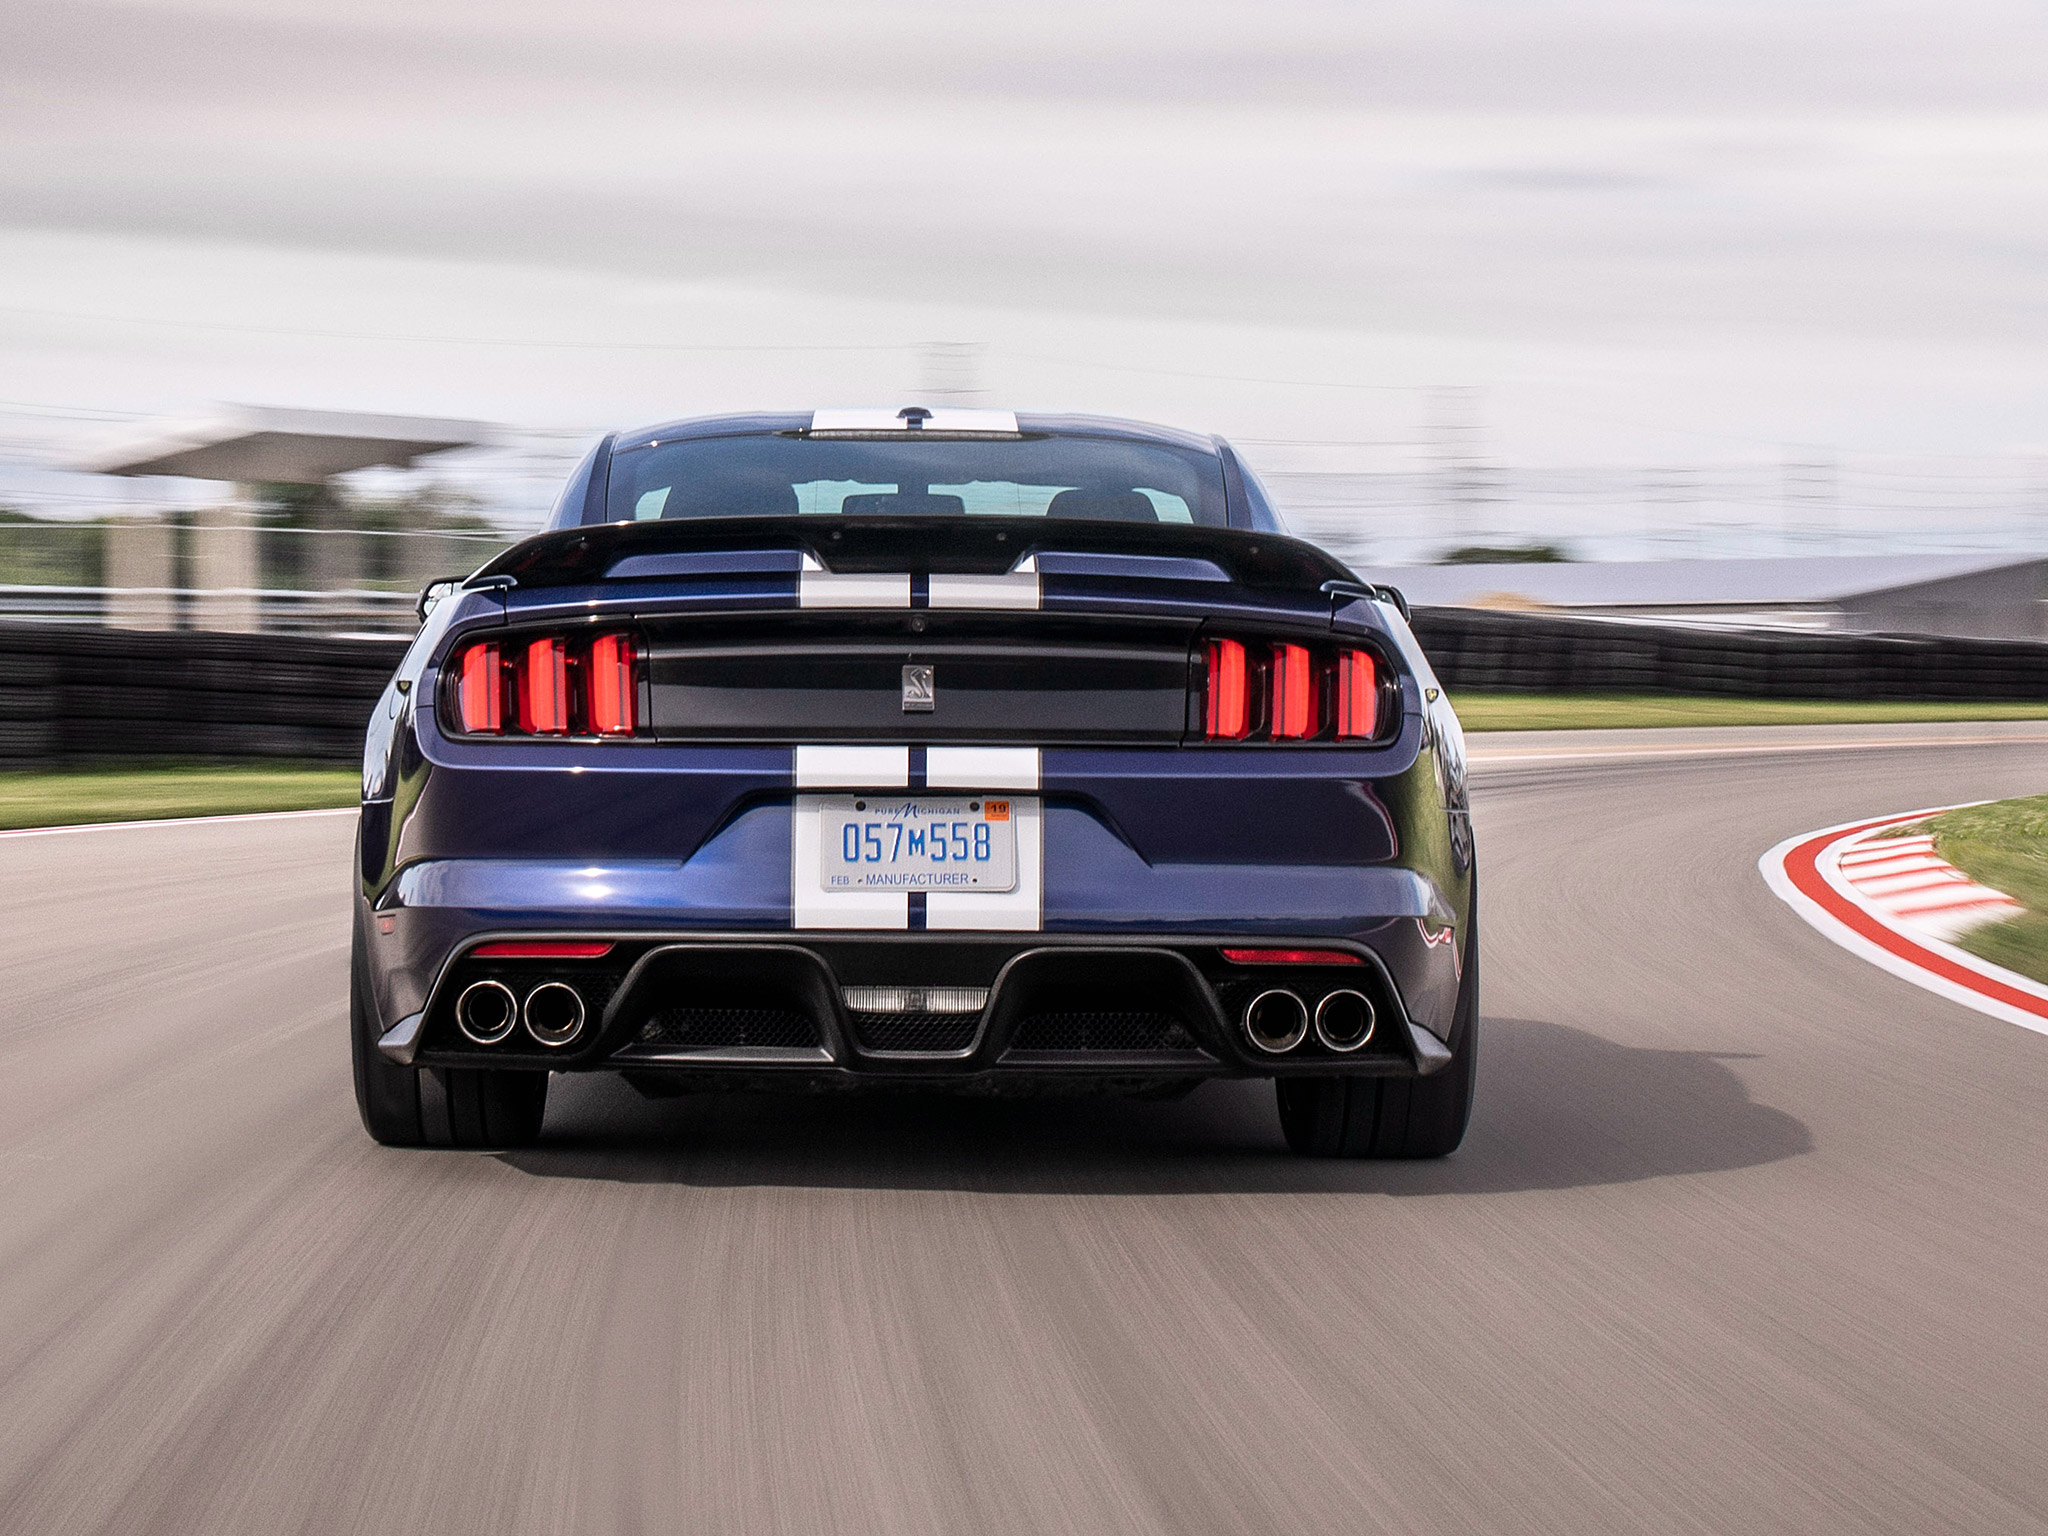  2019 Ford Shelby Mustang GT350 Wallpaper.